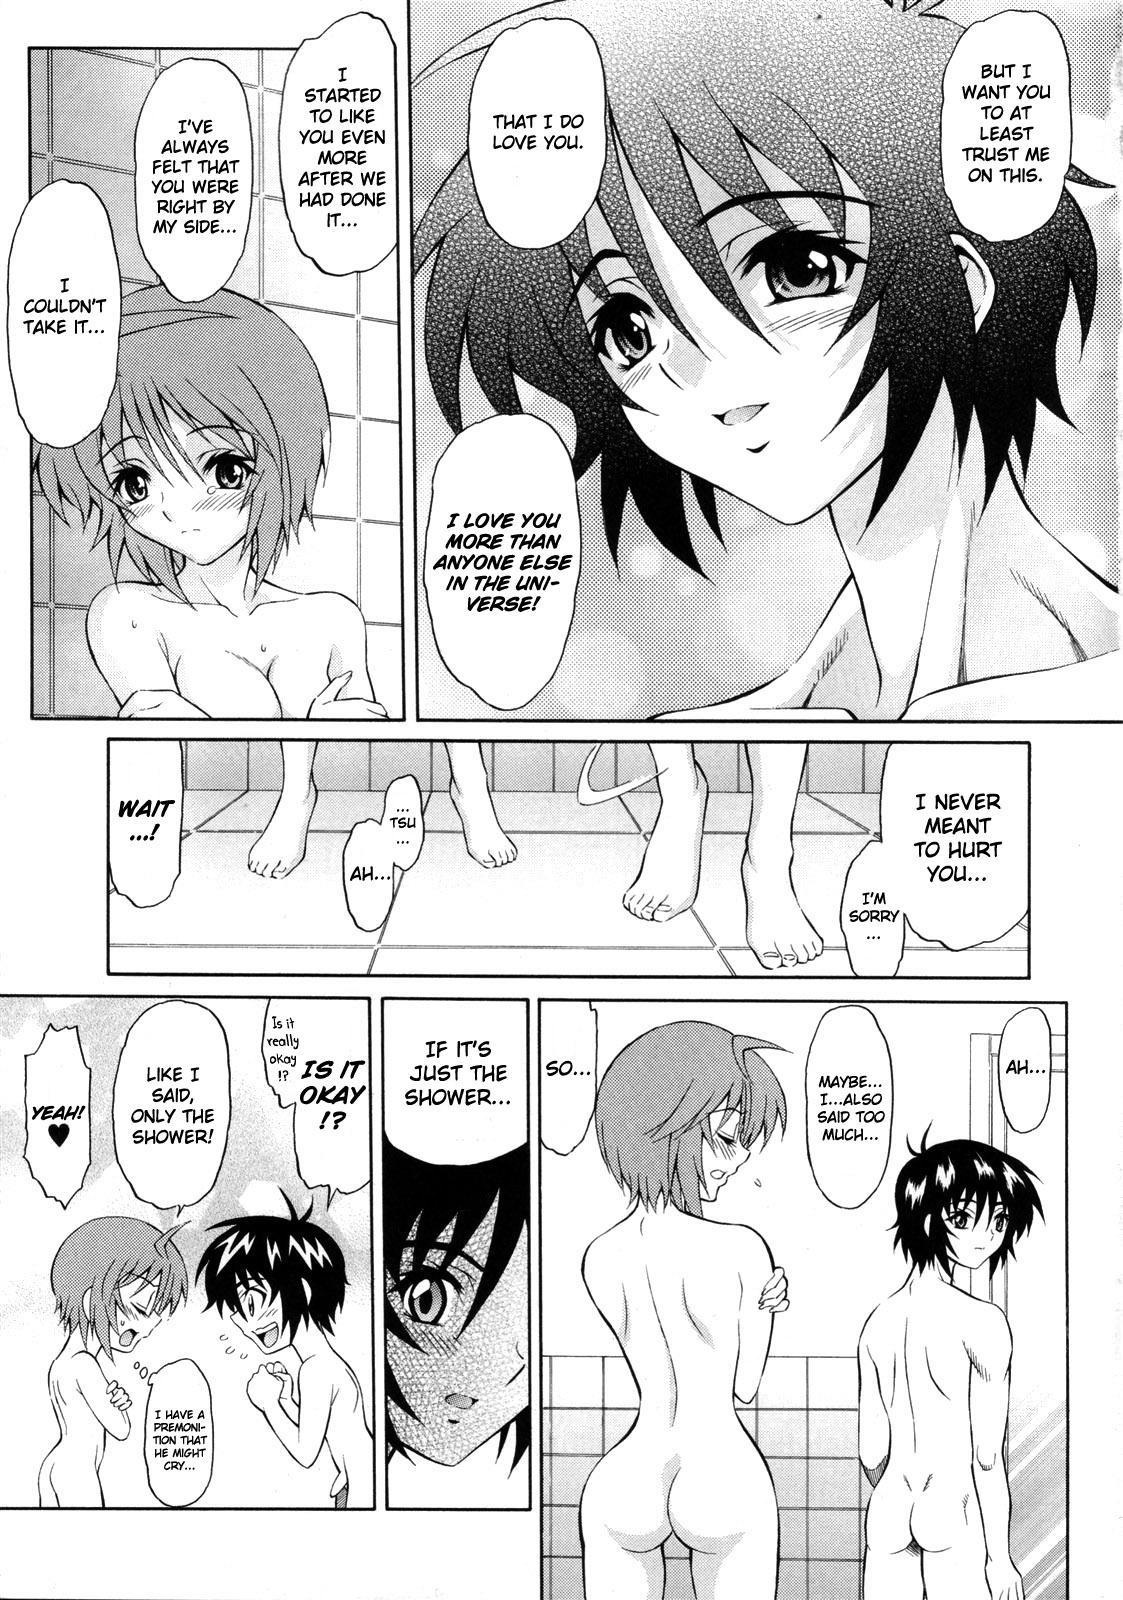 Fat Pussy Honey Come! Burnning!! 04+ - Gundam seed destiny Doublepenetration - Page 8